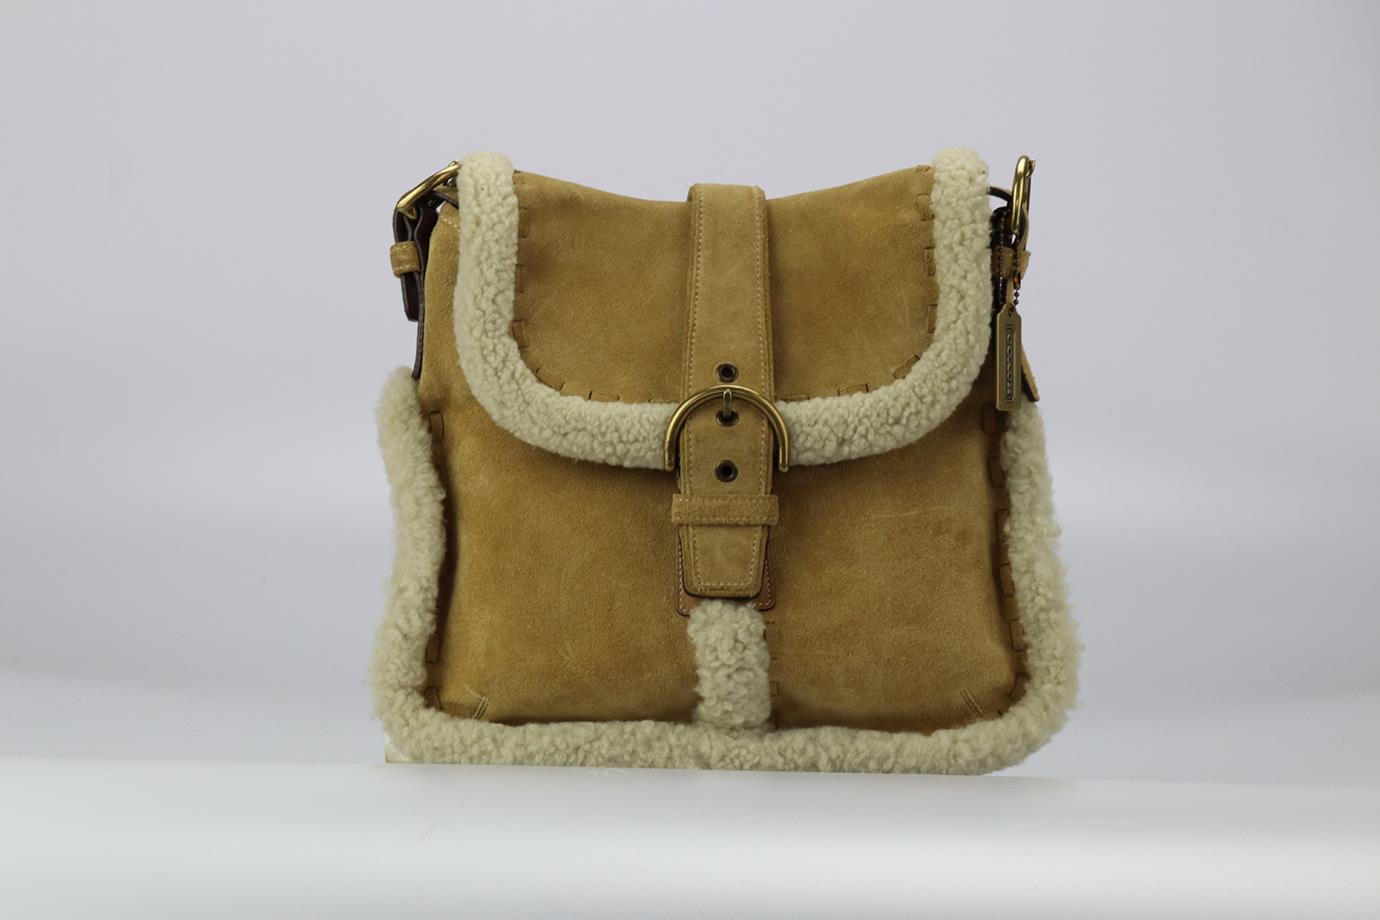 COACH SHEARLING AND SUEDE SHOULDER BAG